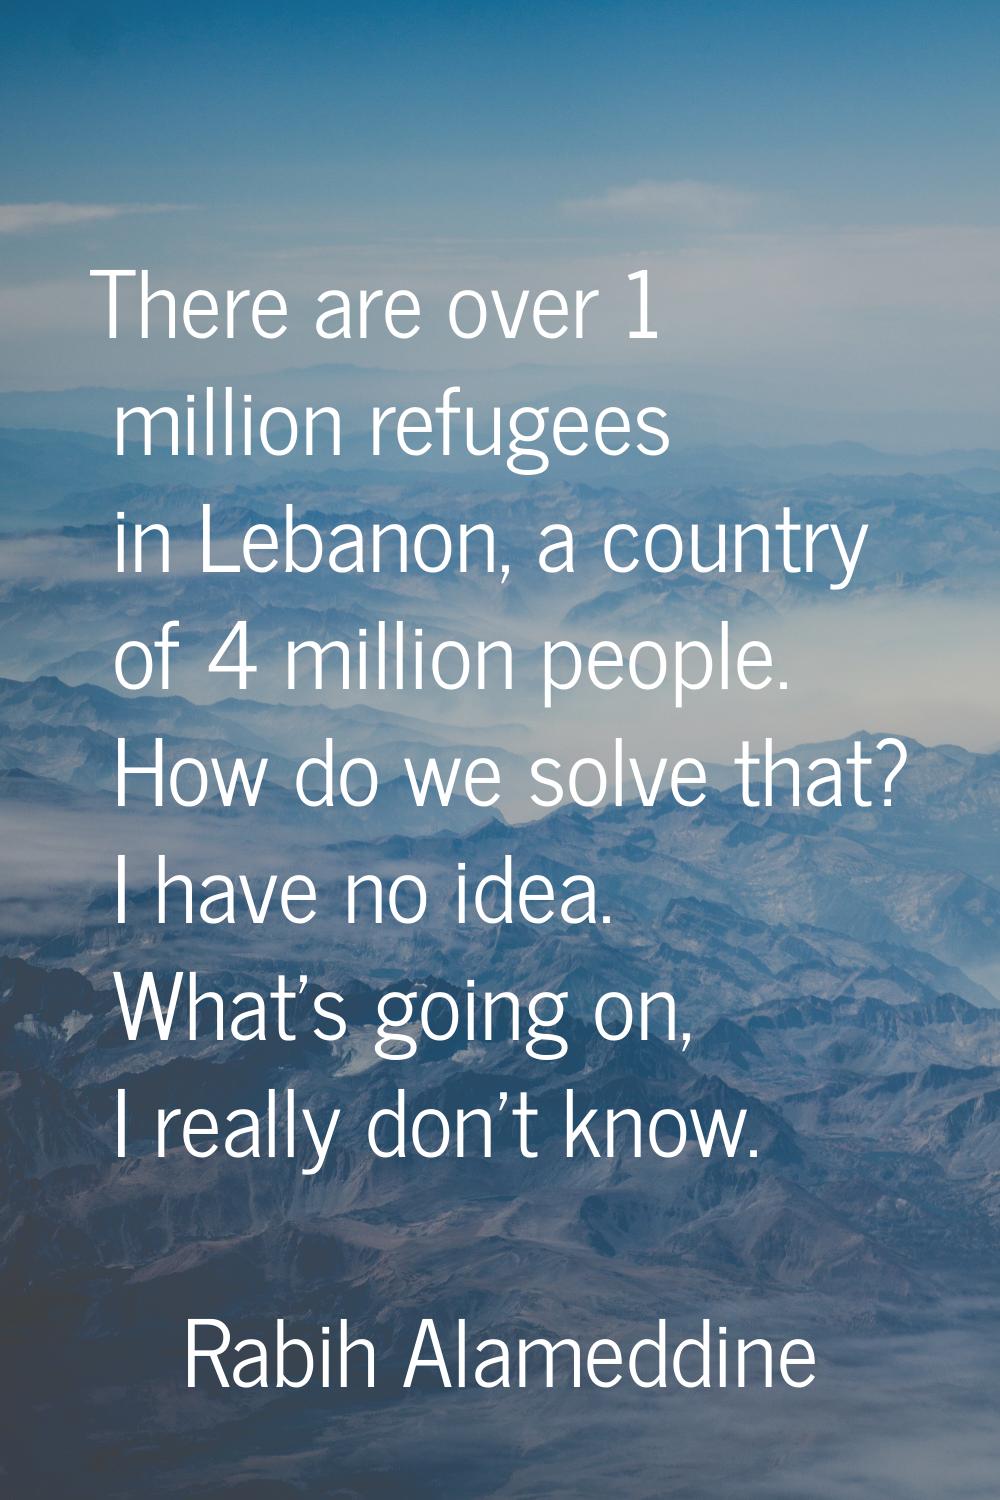 There are over 1 million refugees in Lebanon, a country of 4 million people. How do we solve that? 